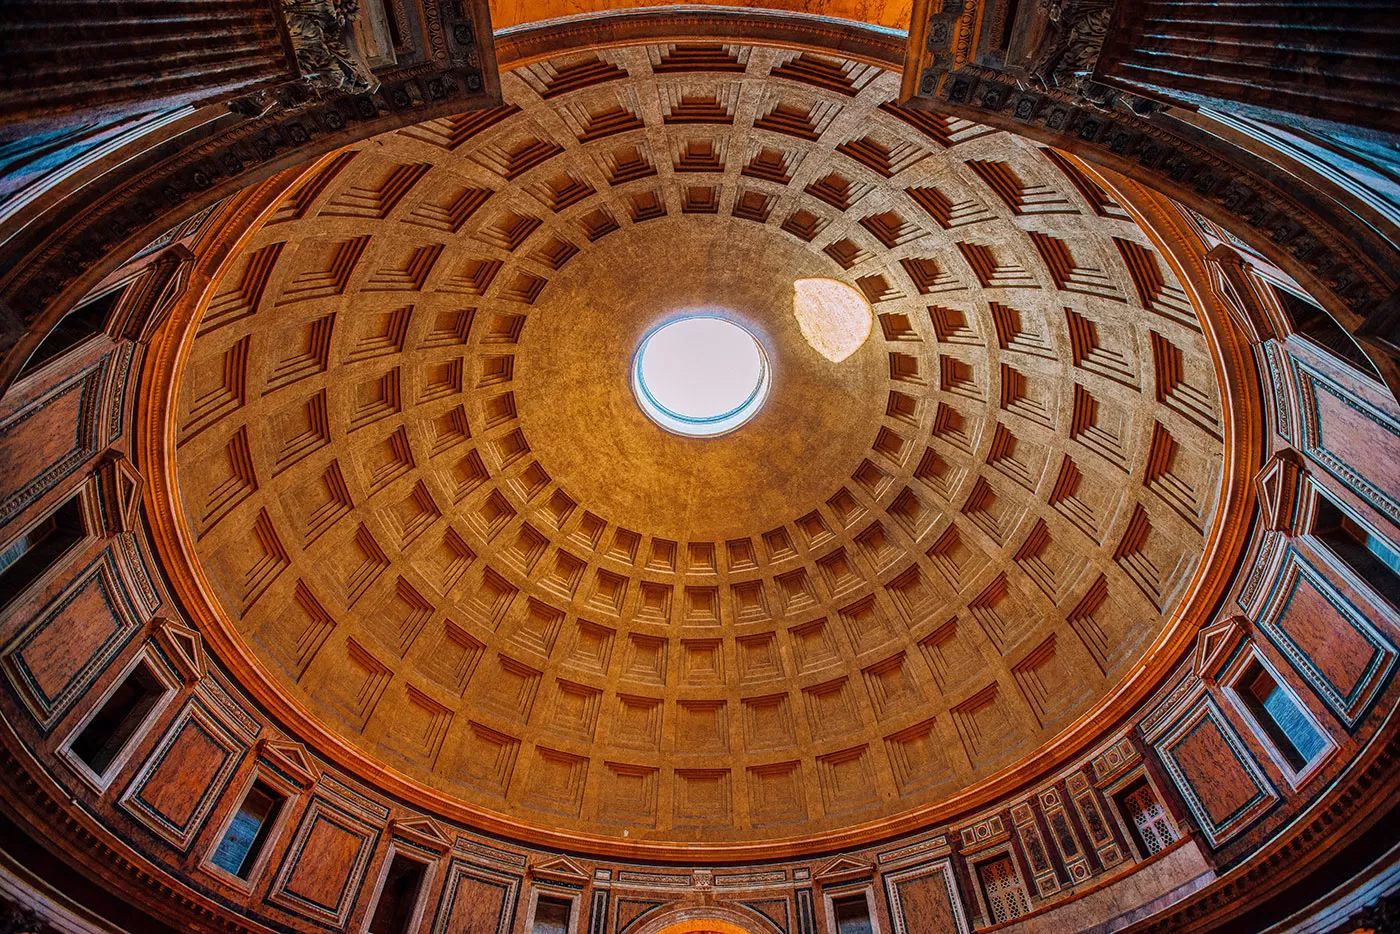 Hotels near the Pantheon Rome - Oculus inside the Pantheon